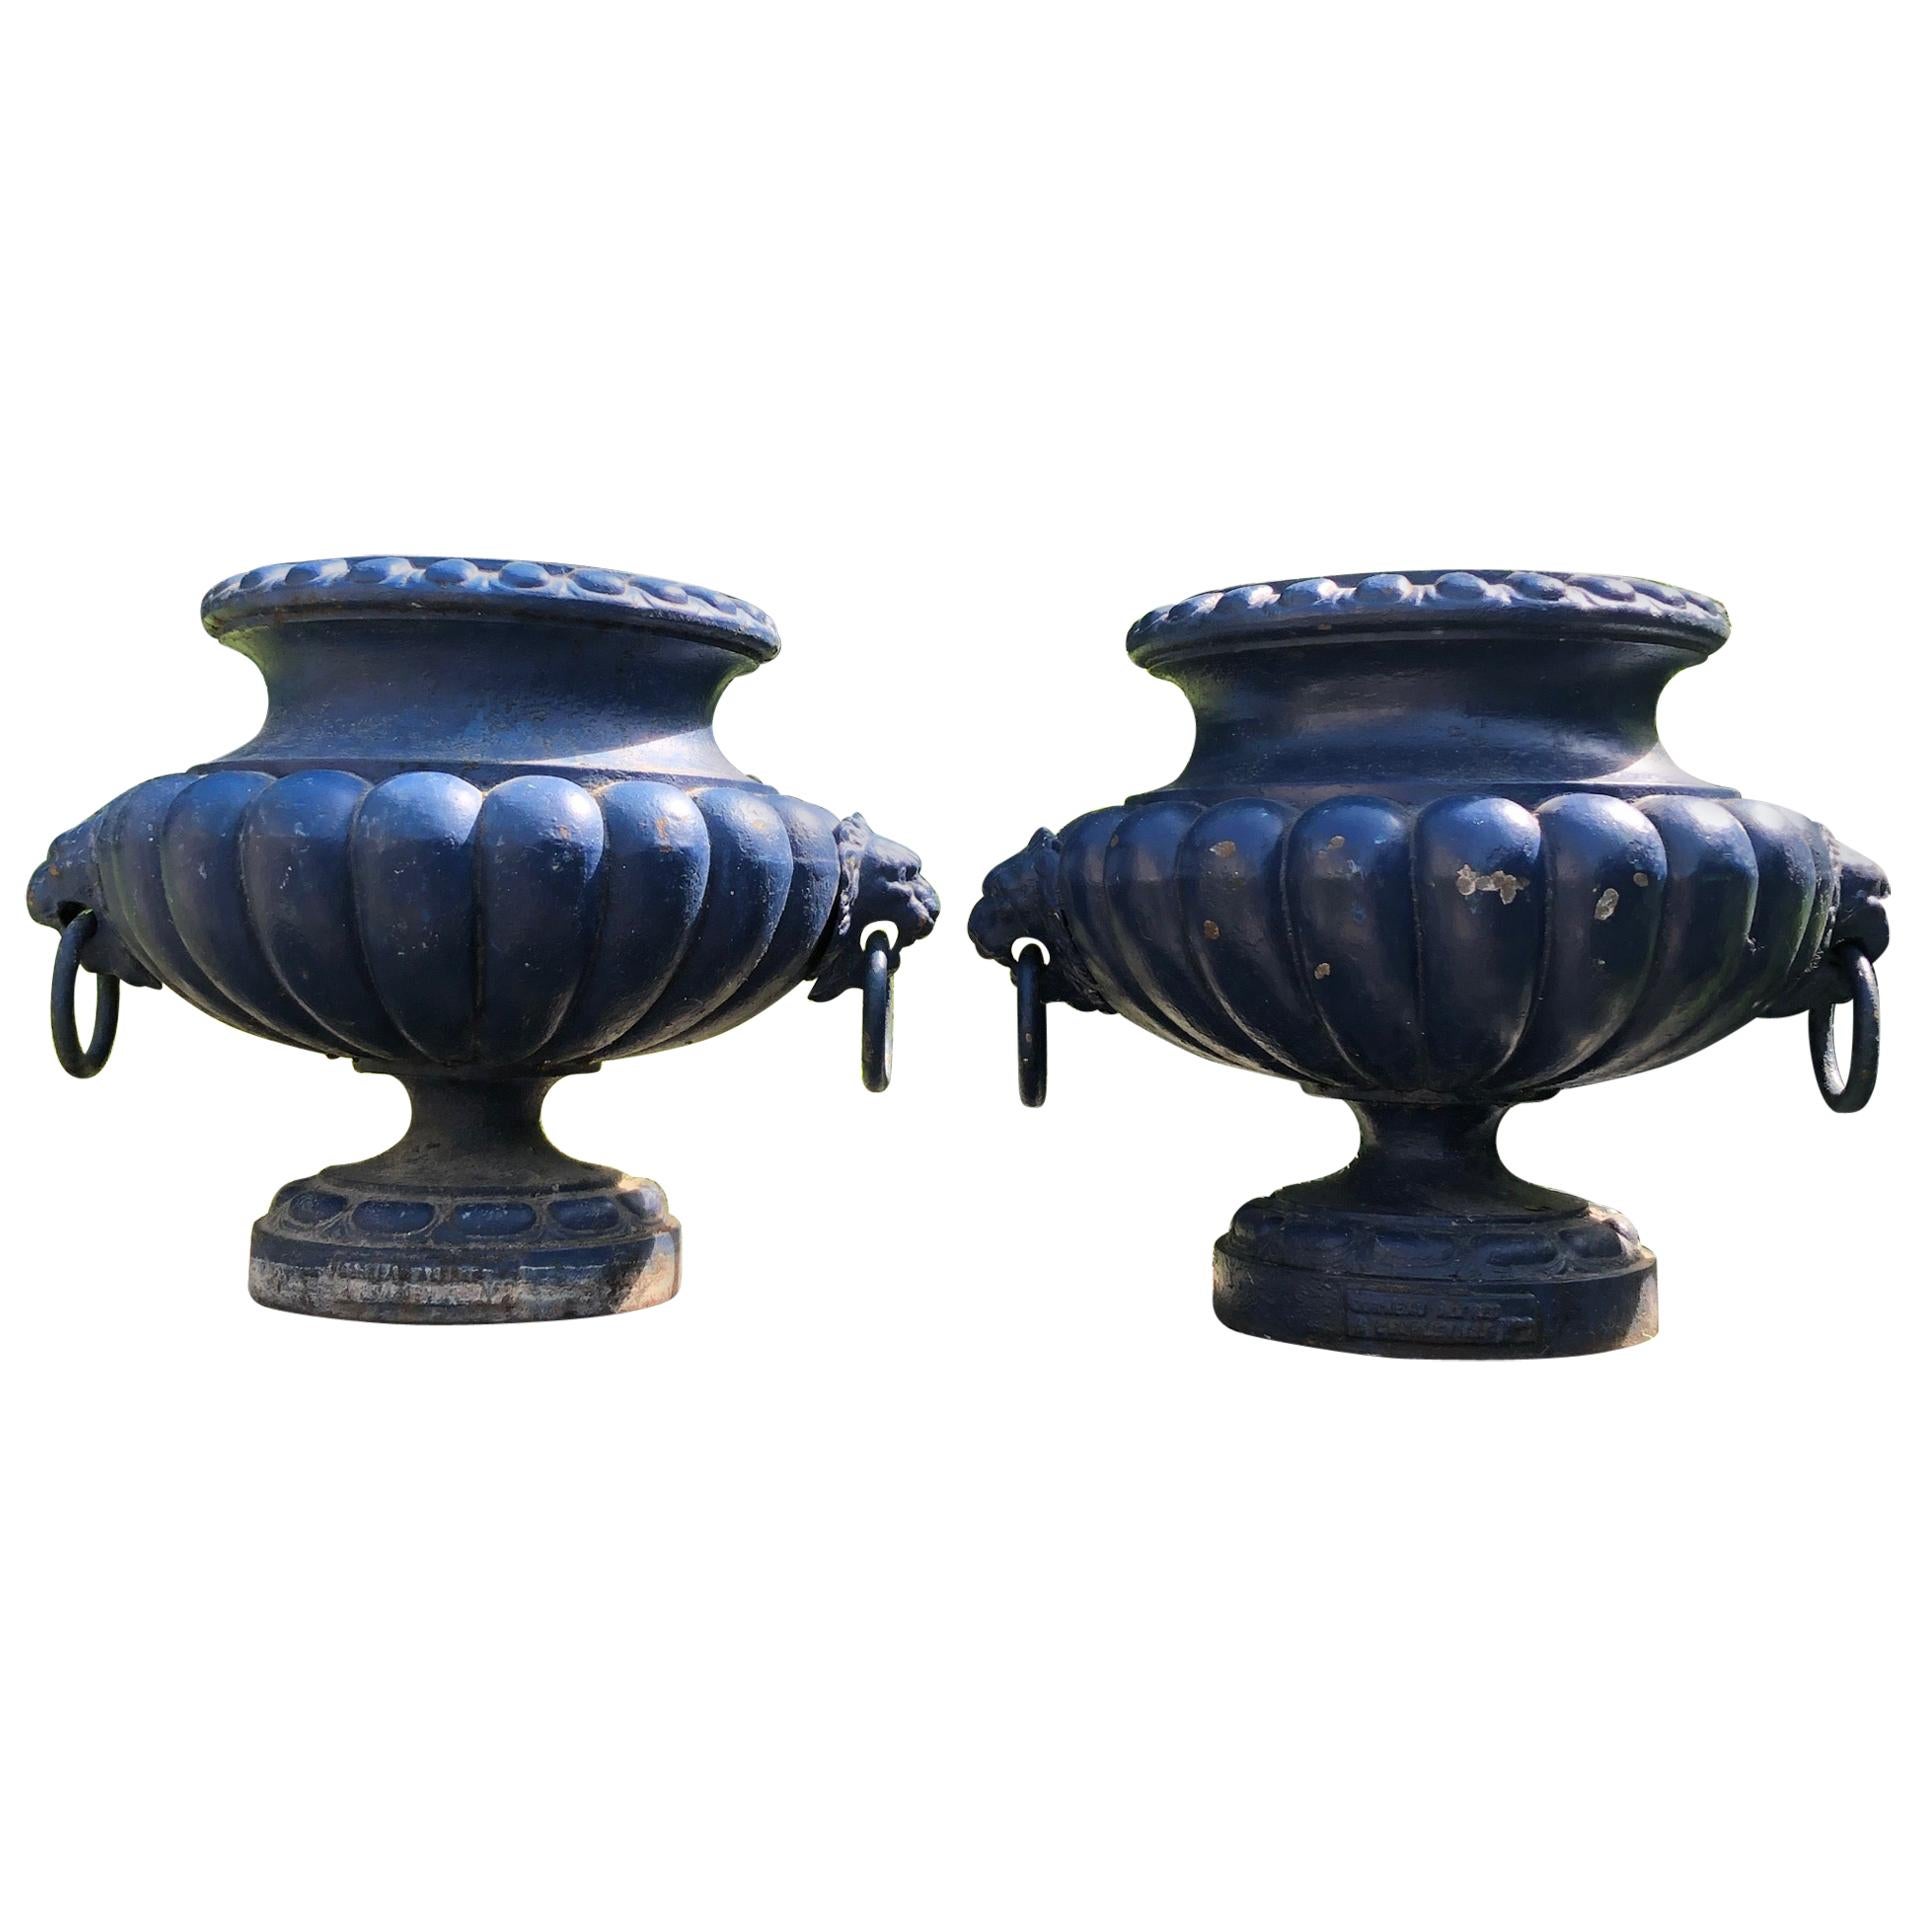 Pair of French 19th C Cast Iron Urns with Lion Handles, Signed Alfred Corneau